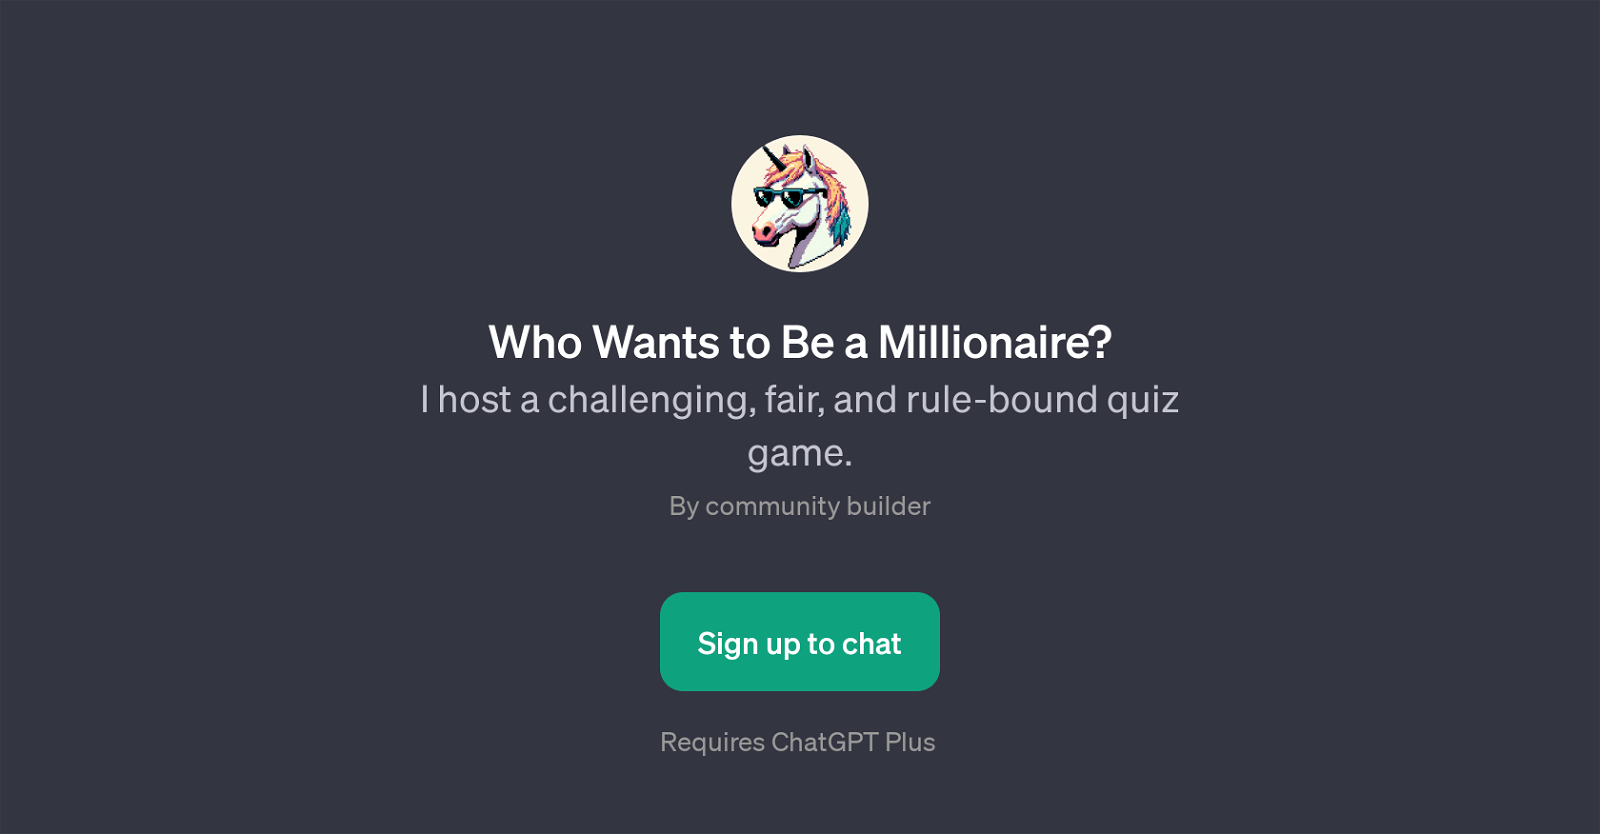 Who Wants to Be a Millionaire? website